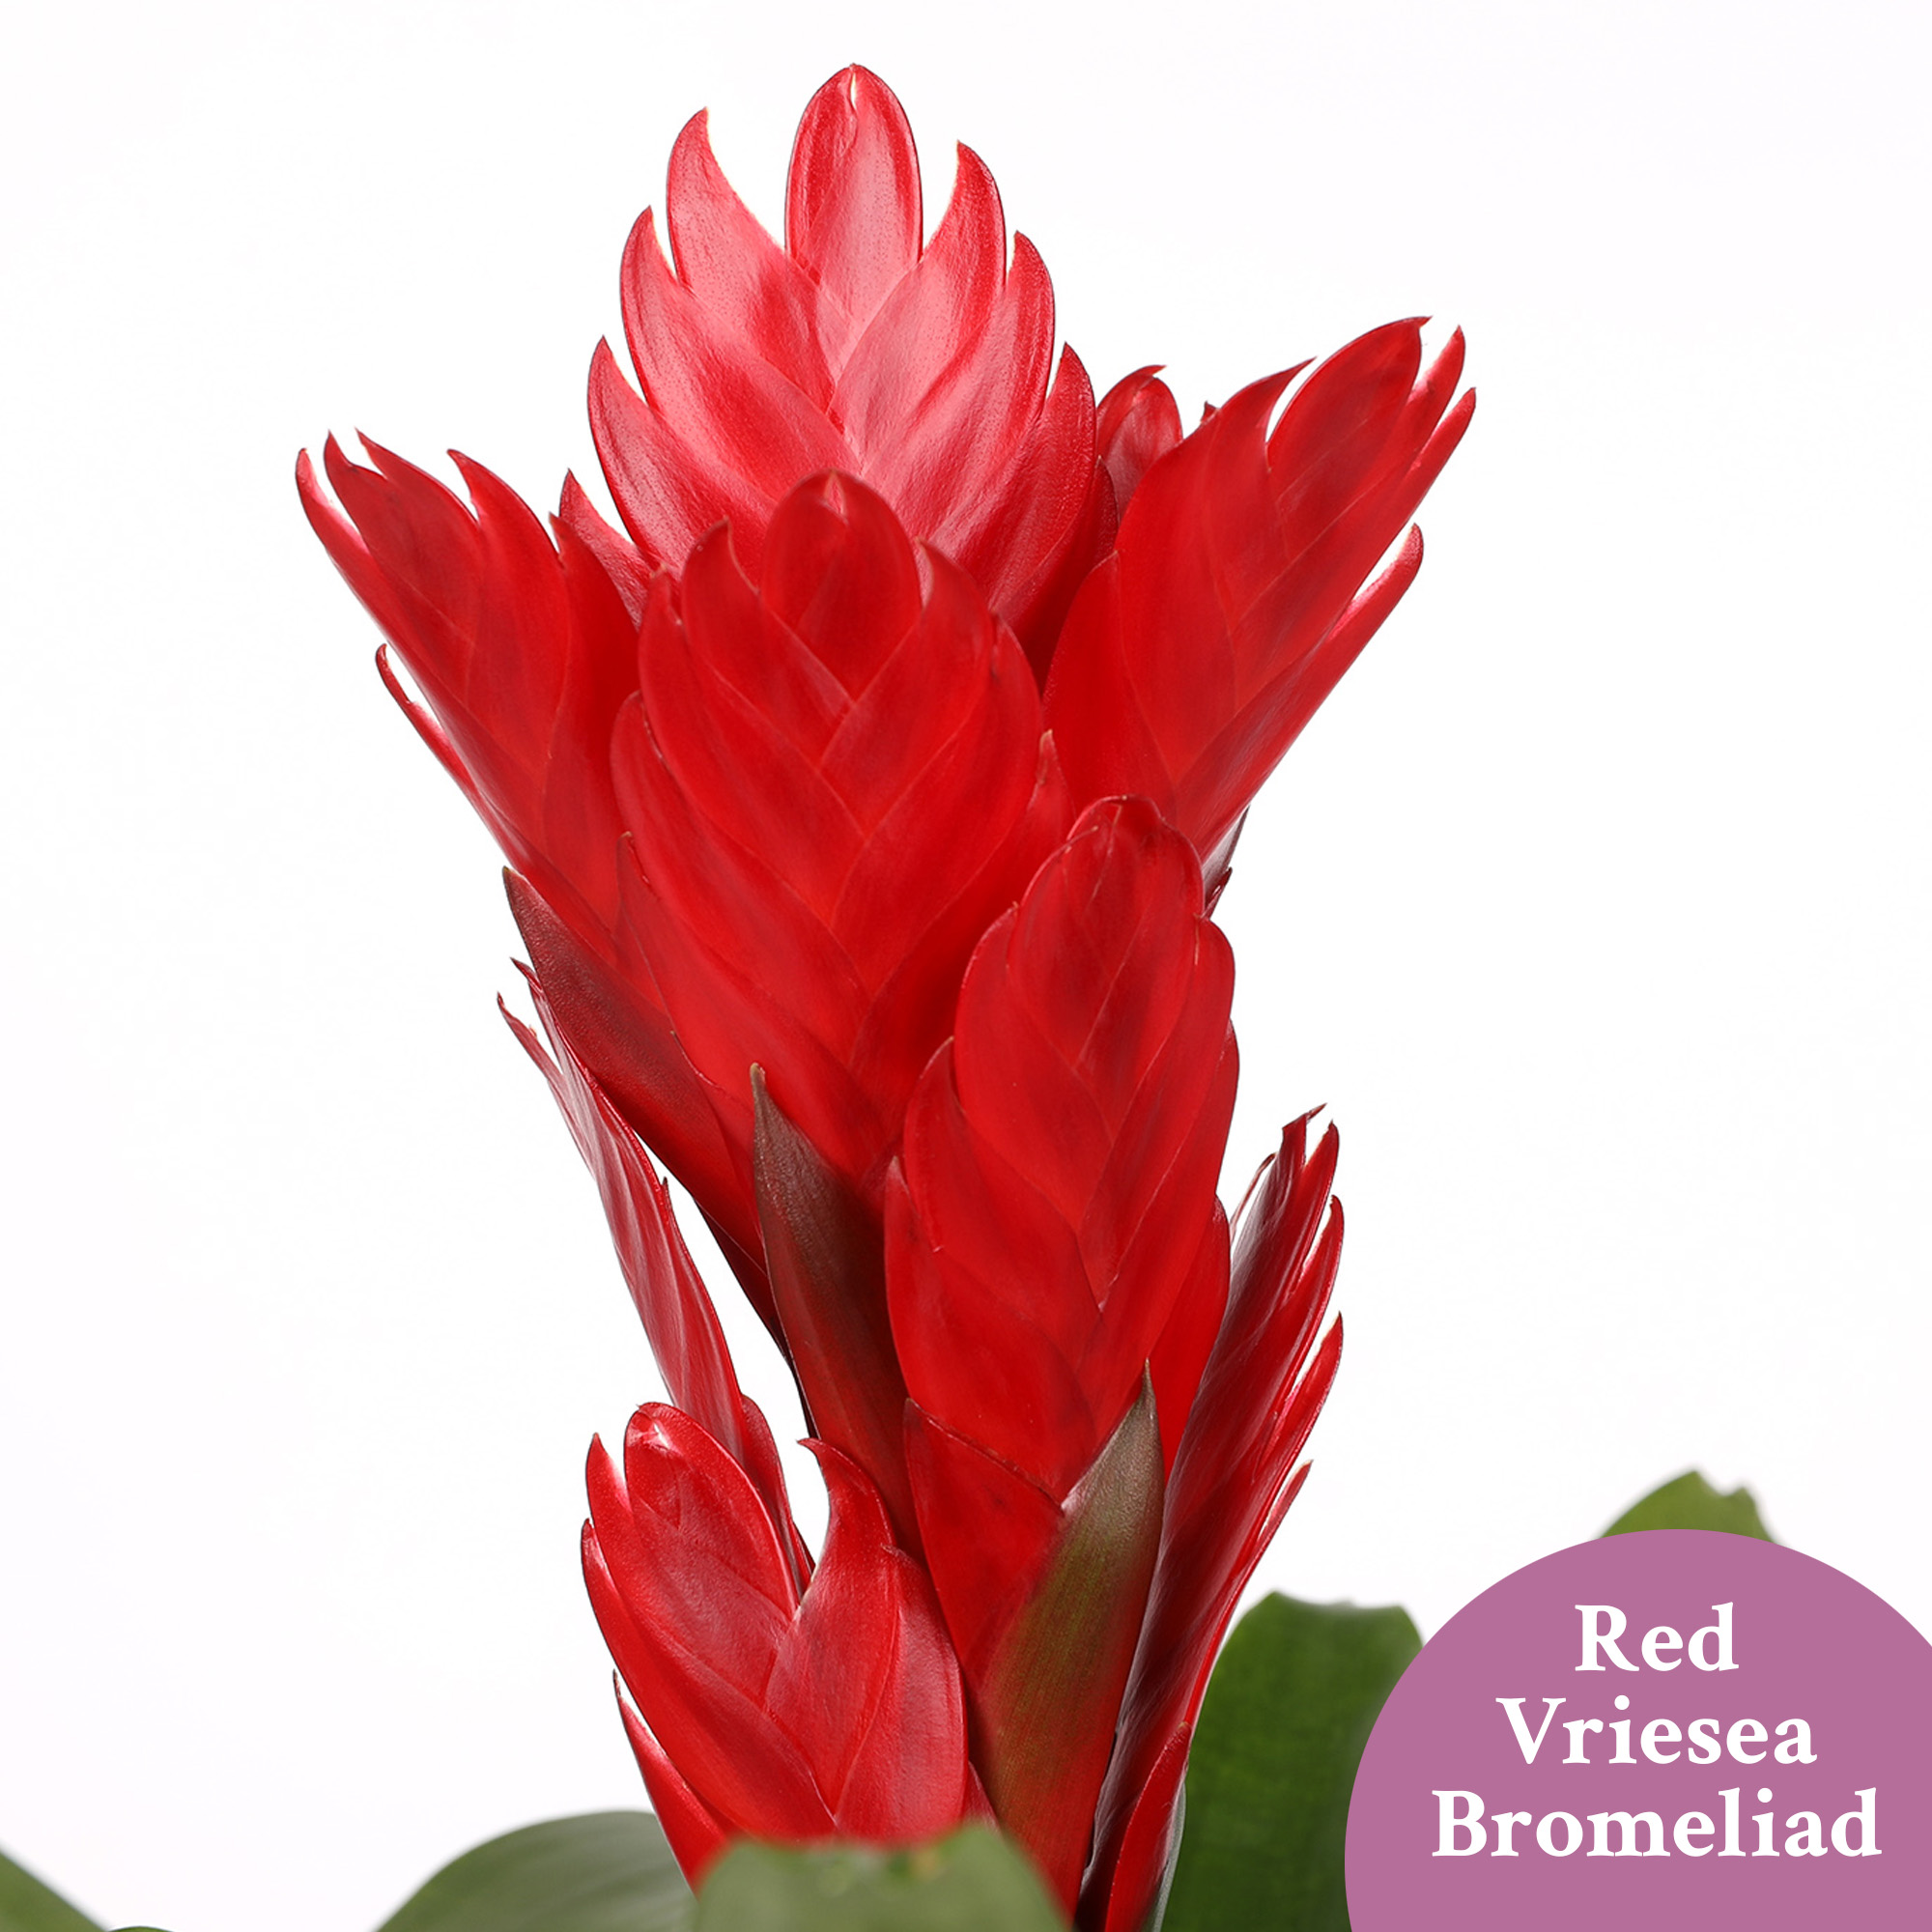 Just Add Ice 15" Tall Red Vriesea Bromeliad in 5" Red Ceramic Pot, Live Plant, Indirect Light, Indoor House Plant - image 3 of 5